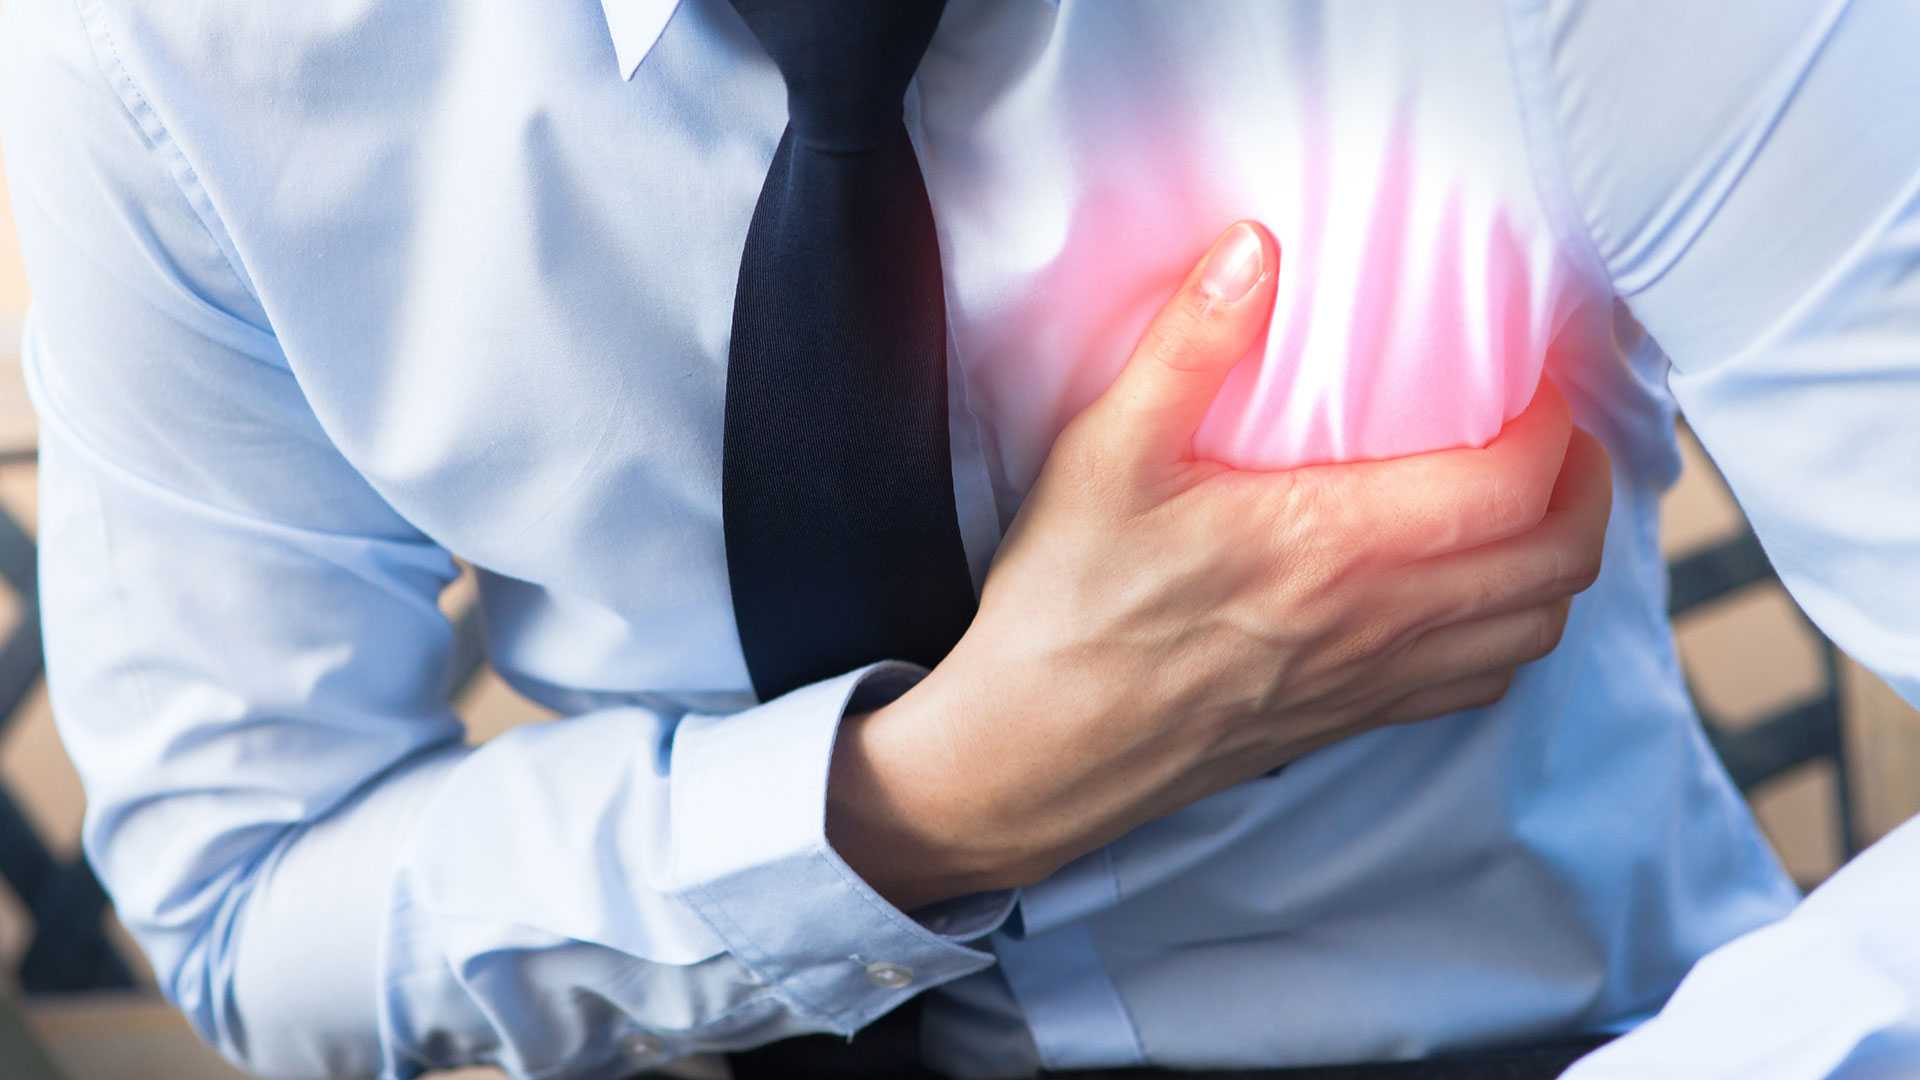 Heart Attack Symptoms: Don’t Ignore These Warning Signs